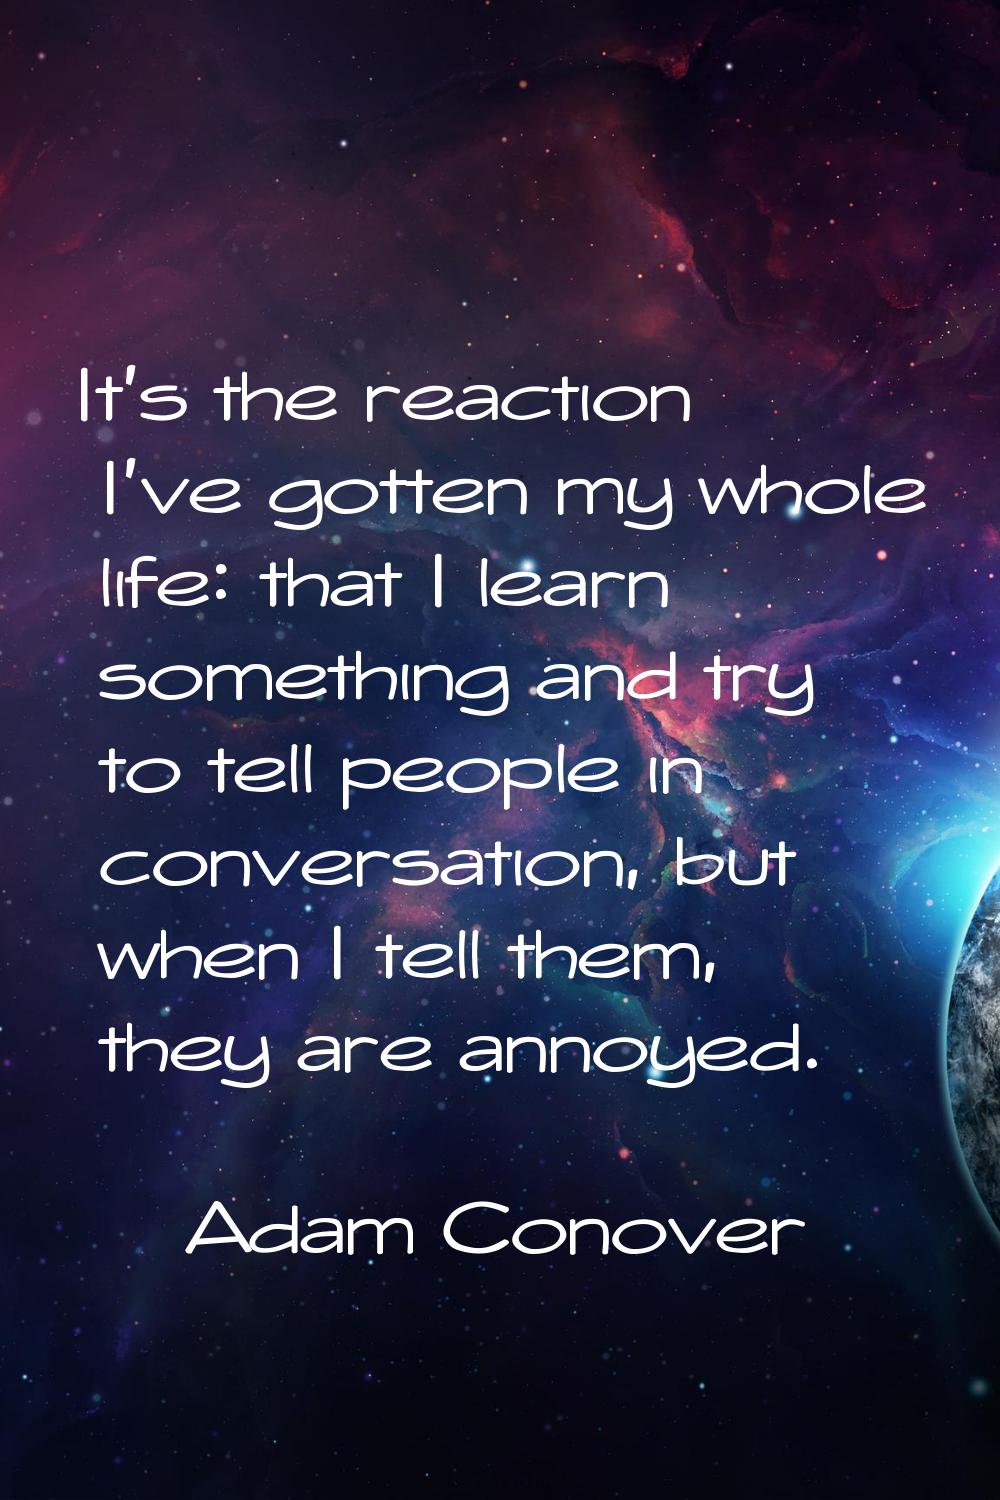 It's the reaction I've gotten my whole life: that I learn something and try to tell people in conve